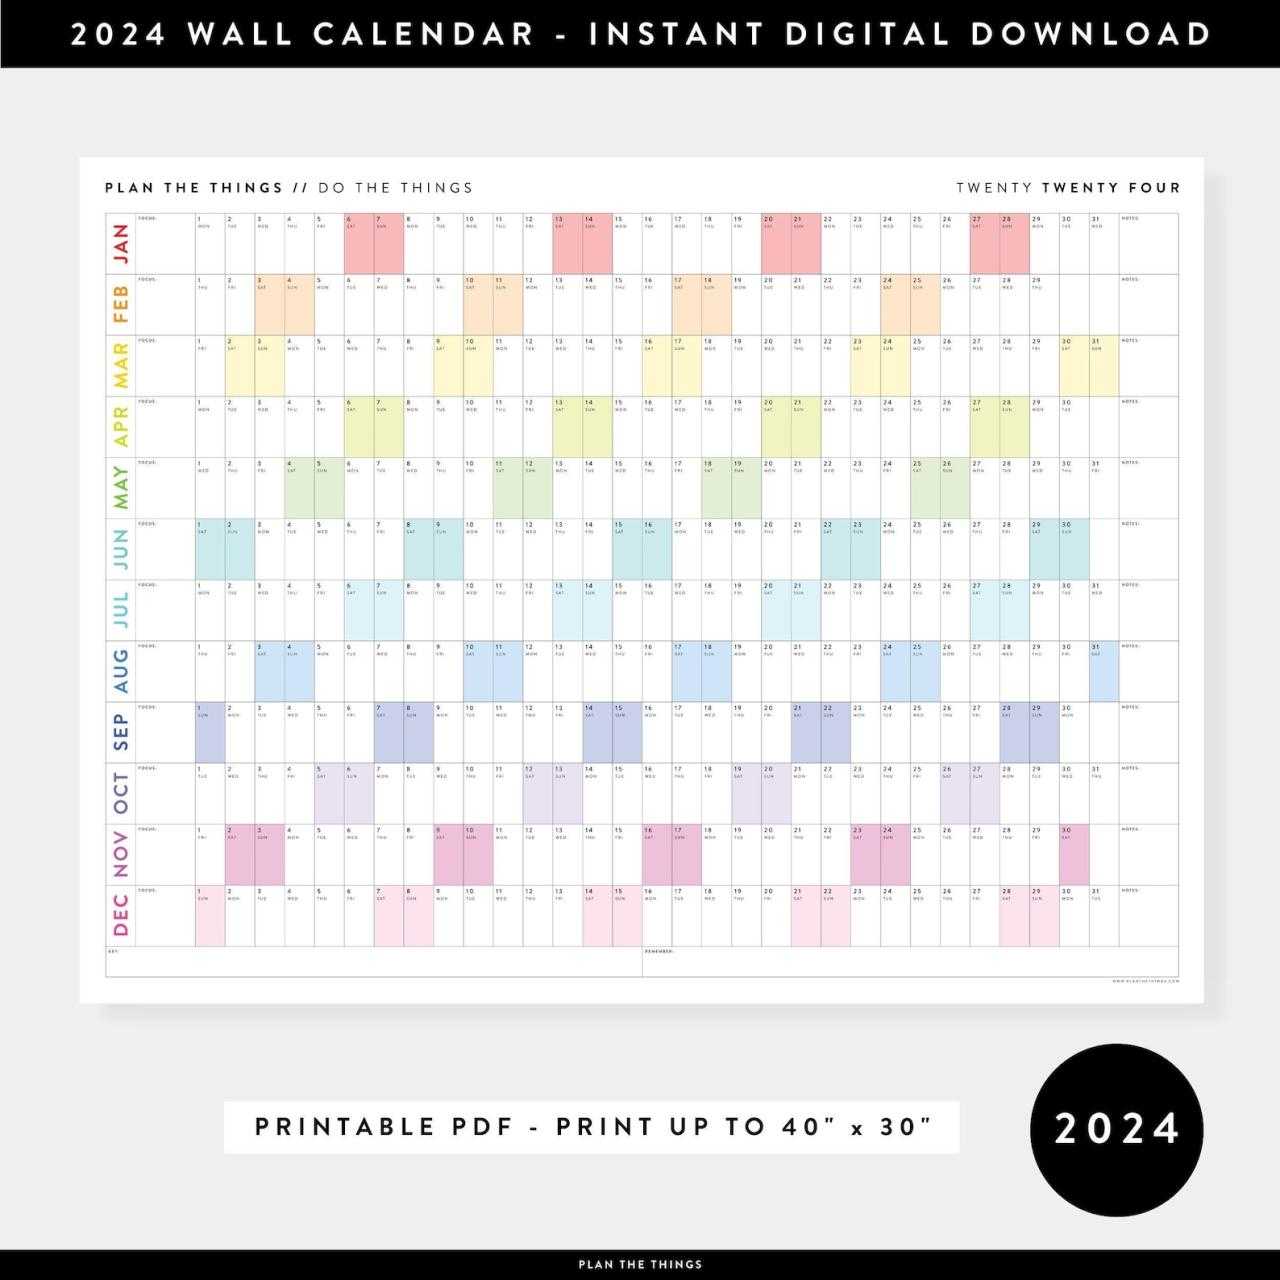 Planning Ahead: Promotional Wall Calendars 2024 - Organizing Your Year with Style
